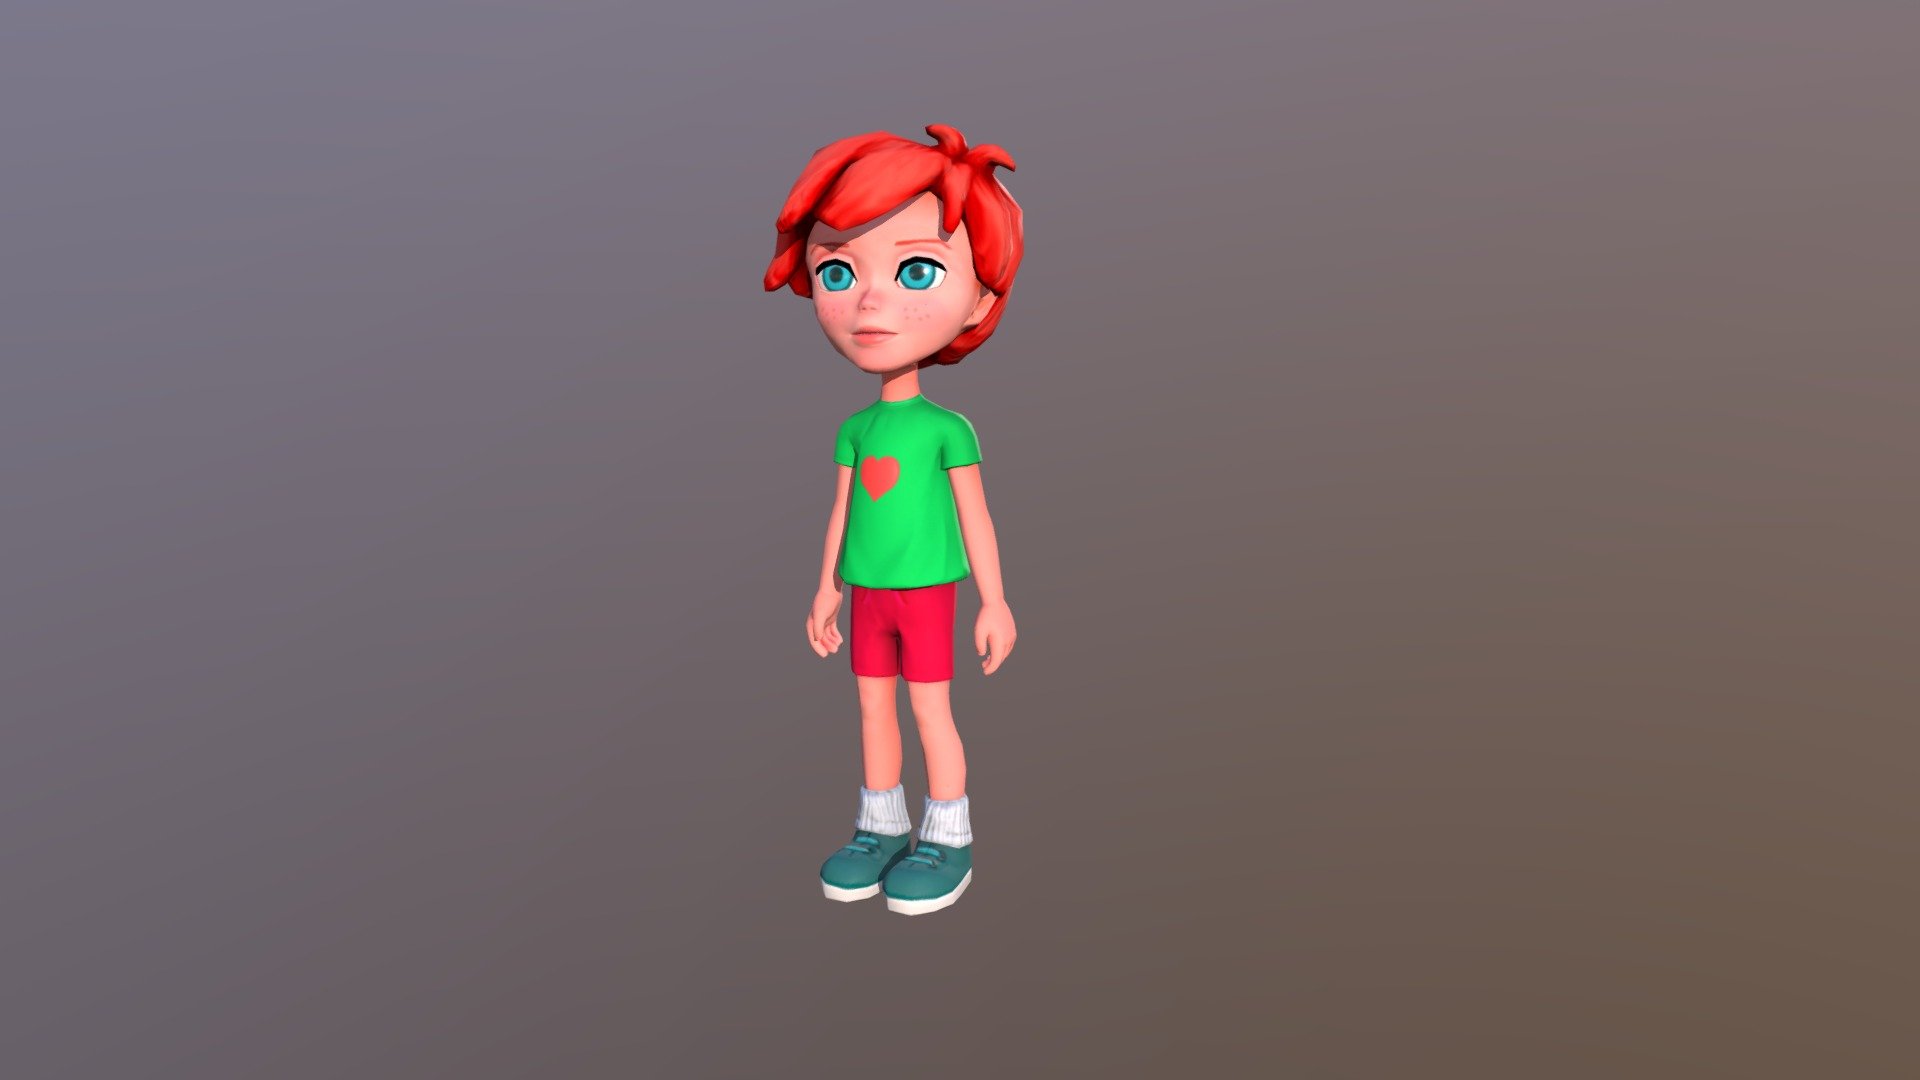 3D model of a kid - remake of the downloadable model.
Updated with Normal (OpenGL), Specular and Roughness maps.
Blend file and glTF now included 3d model